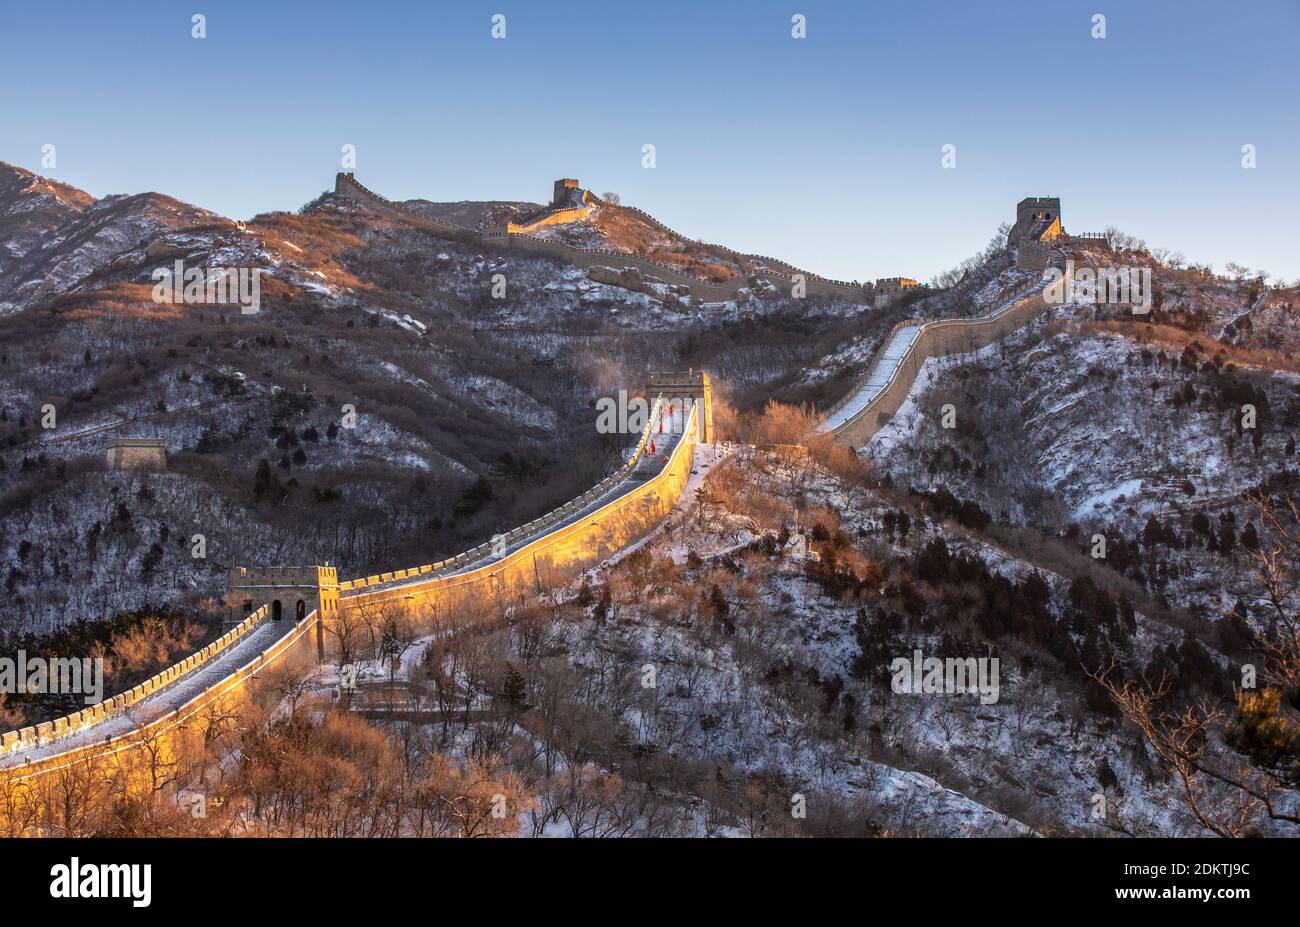 The morning sun shines on the snow-covered Badaling Great Wall, presenting the magnificent northern scenery in Yanqing distrcit, Beijing, China, 12 De Stock Photo